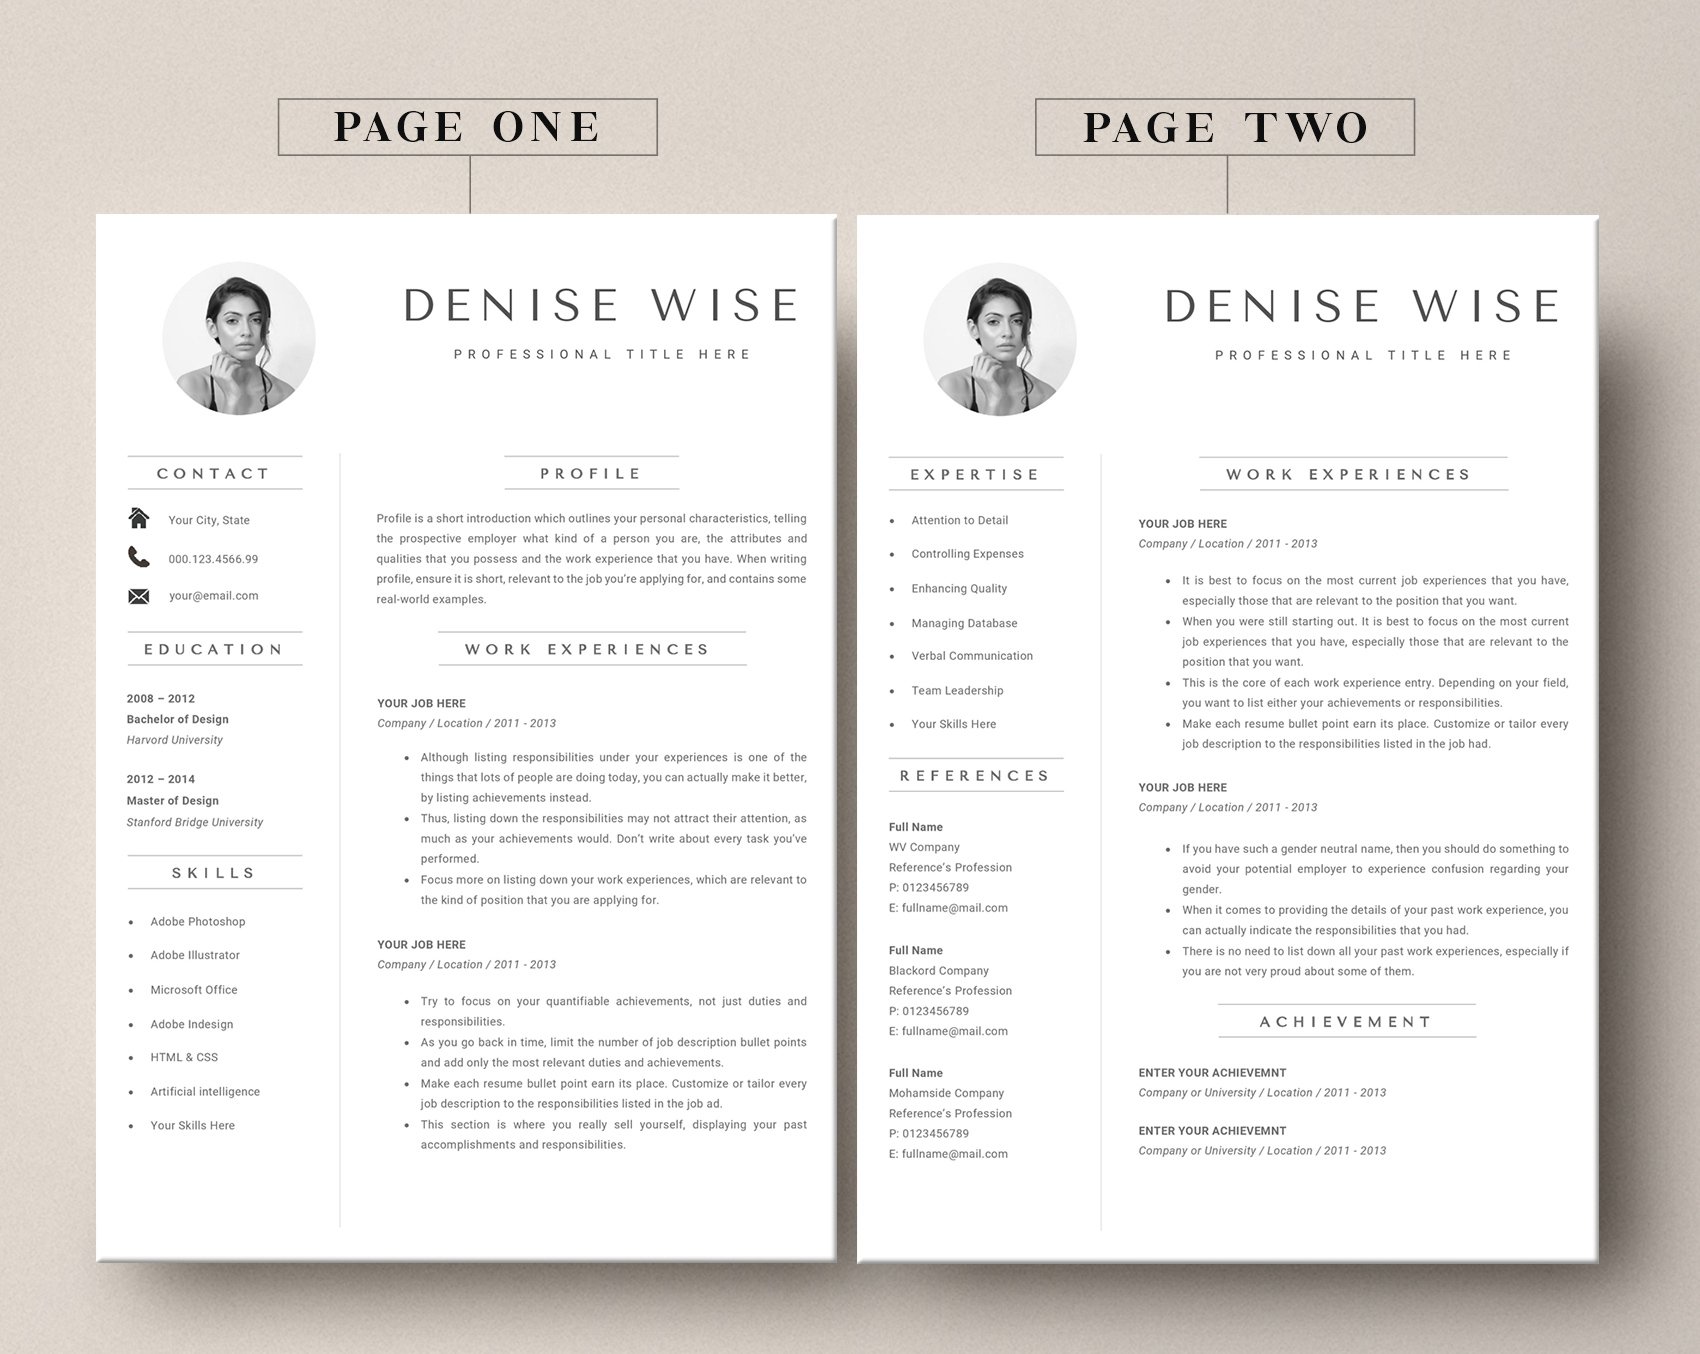 Minimalist Resume Template / CV preview image.